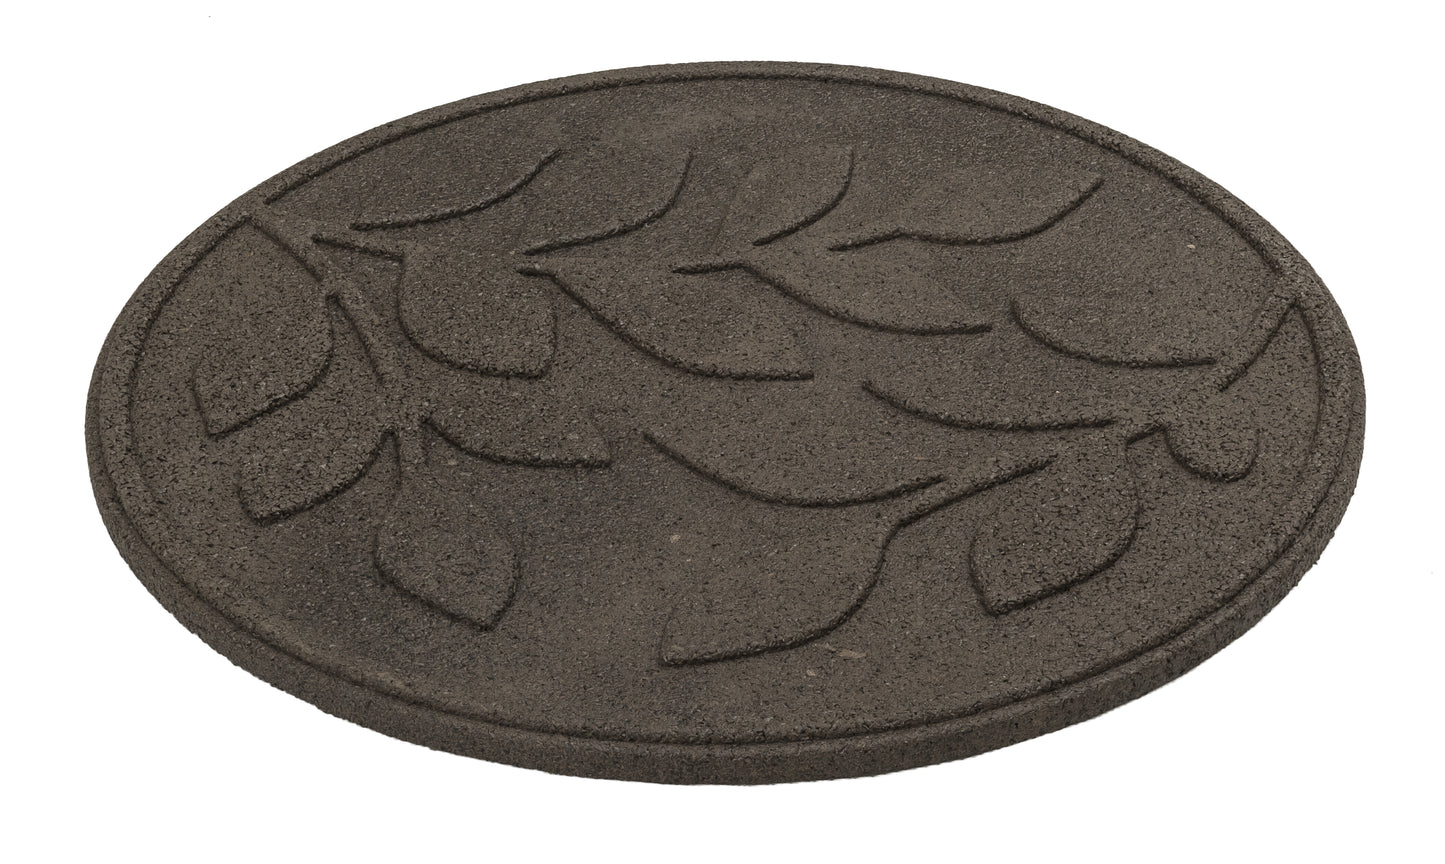 NEW Eco-Friendly Garden Stepping Stones - Leaf Brown